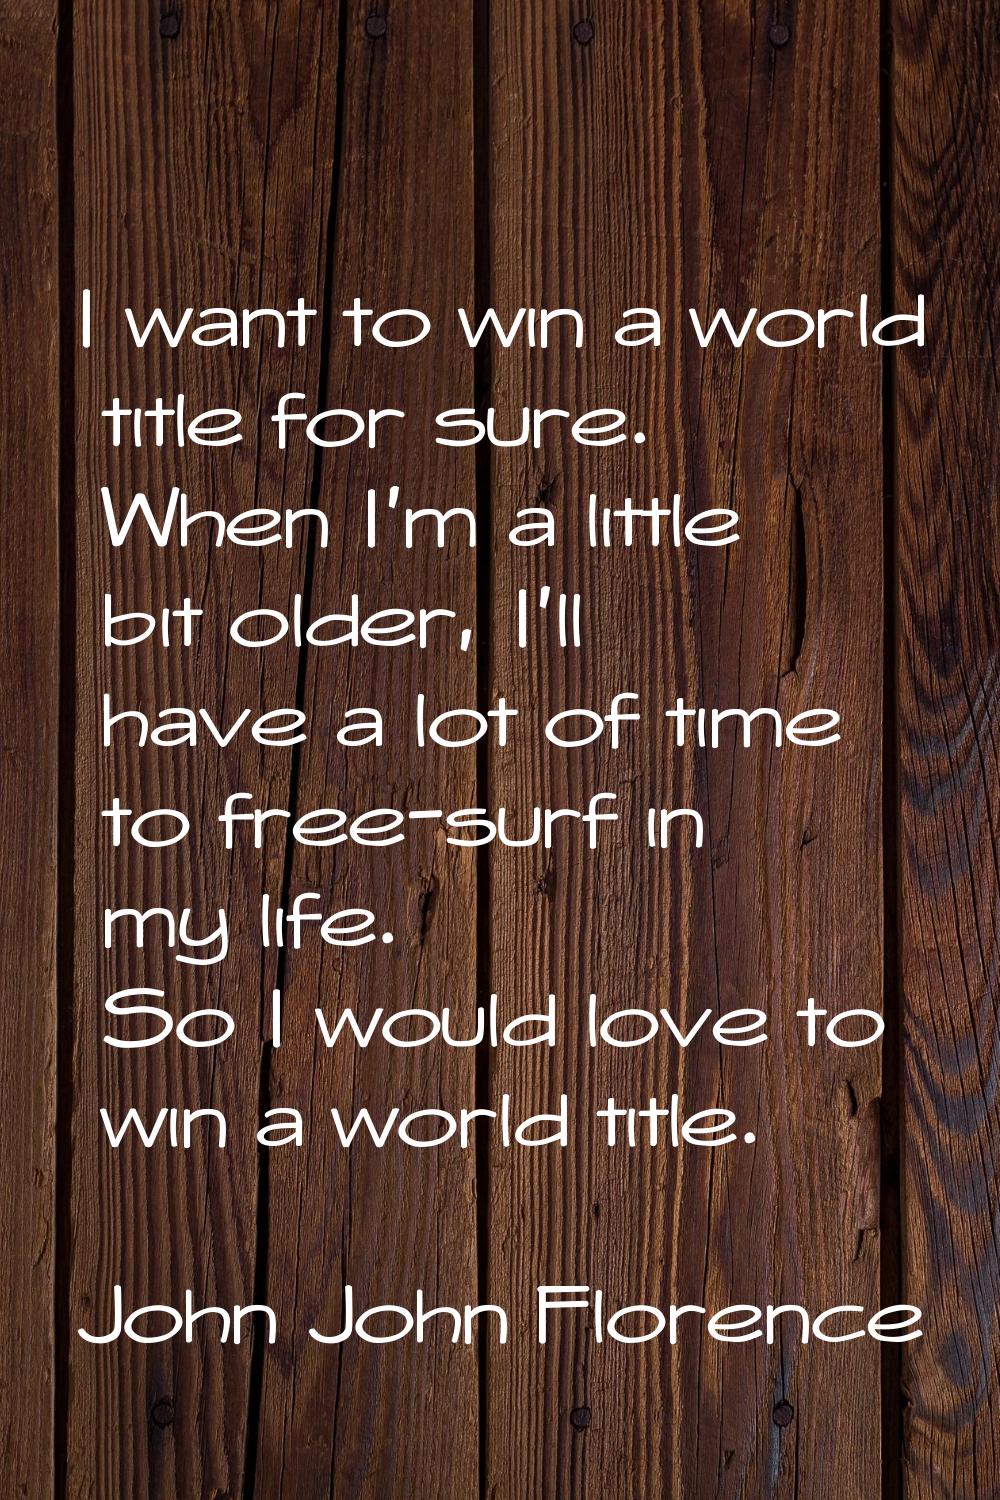 I want to win a world title for sure. When I'm a little bit older, I'll have a lot of time to free-